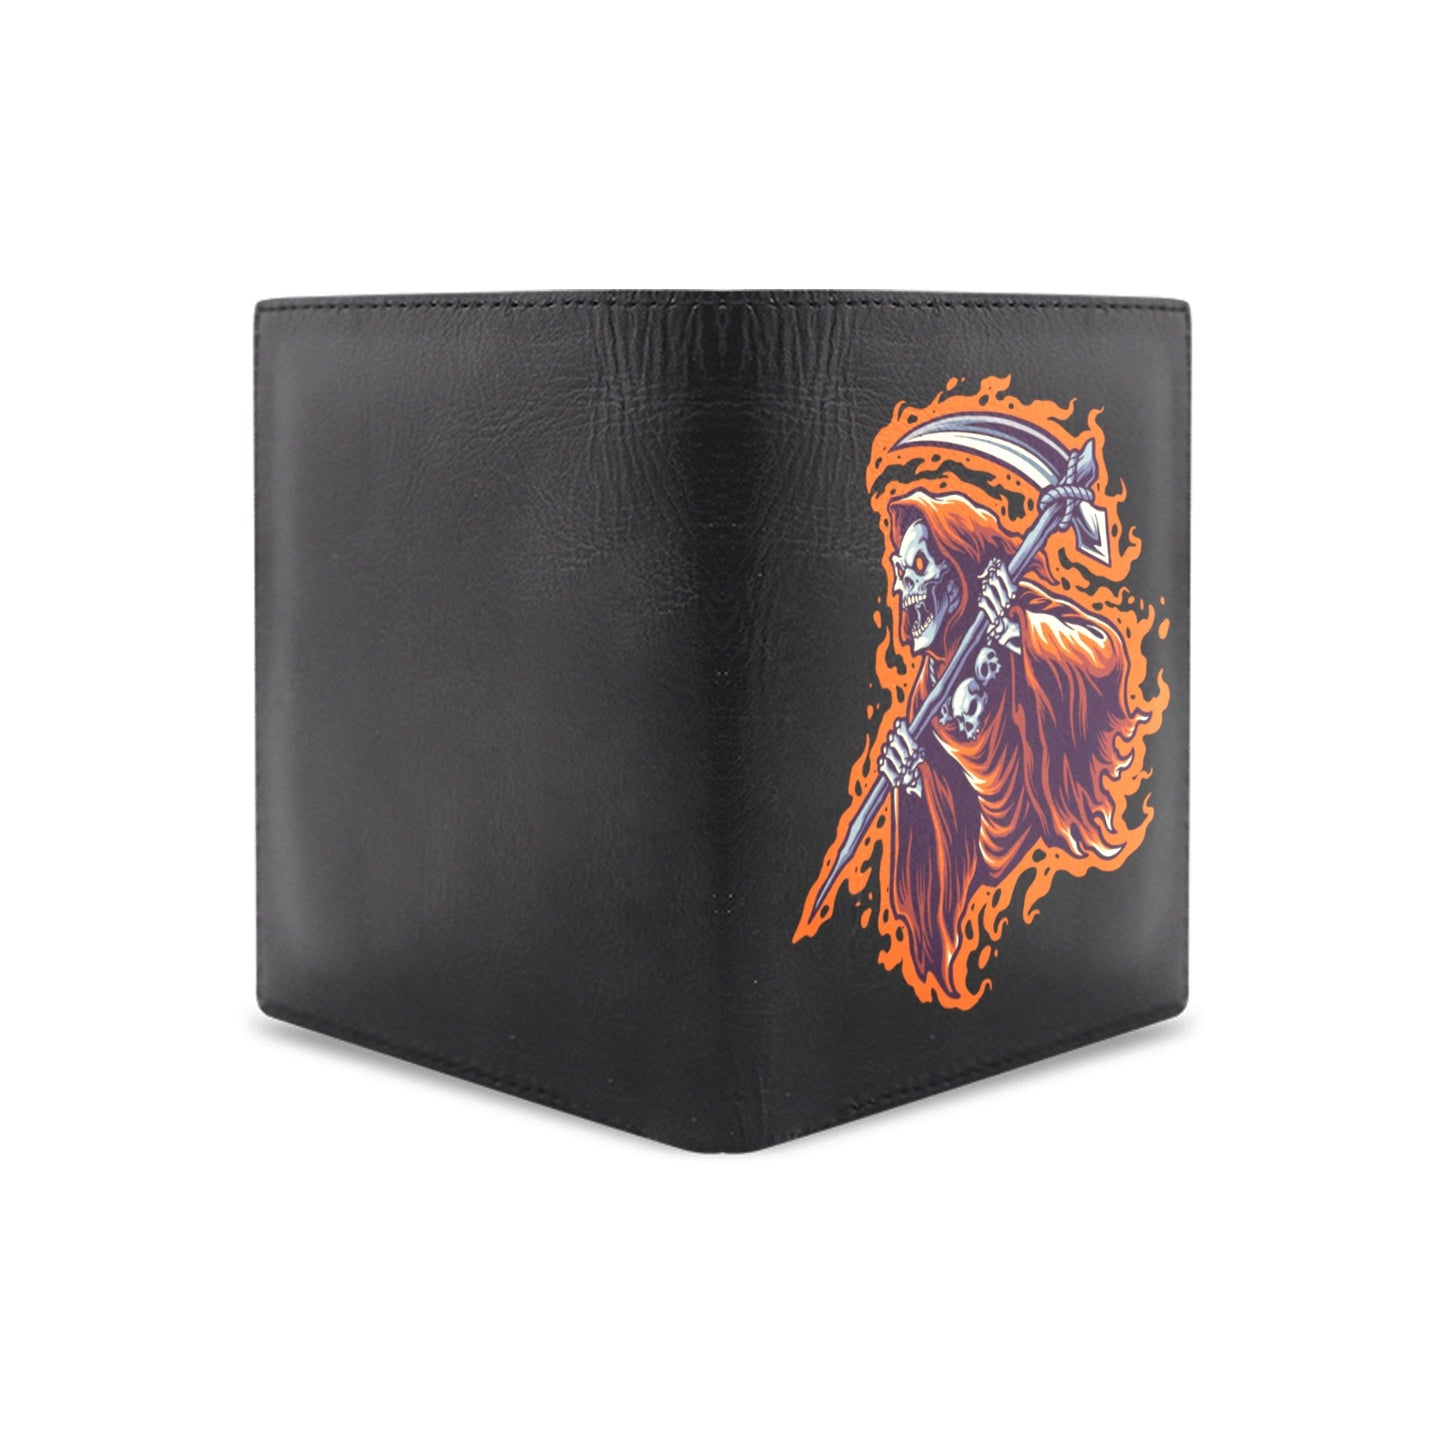 Flaming Grim Reaper Leather Wallet